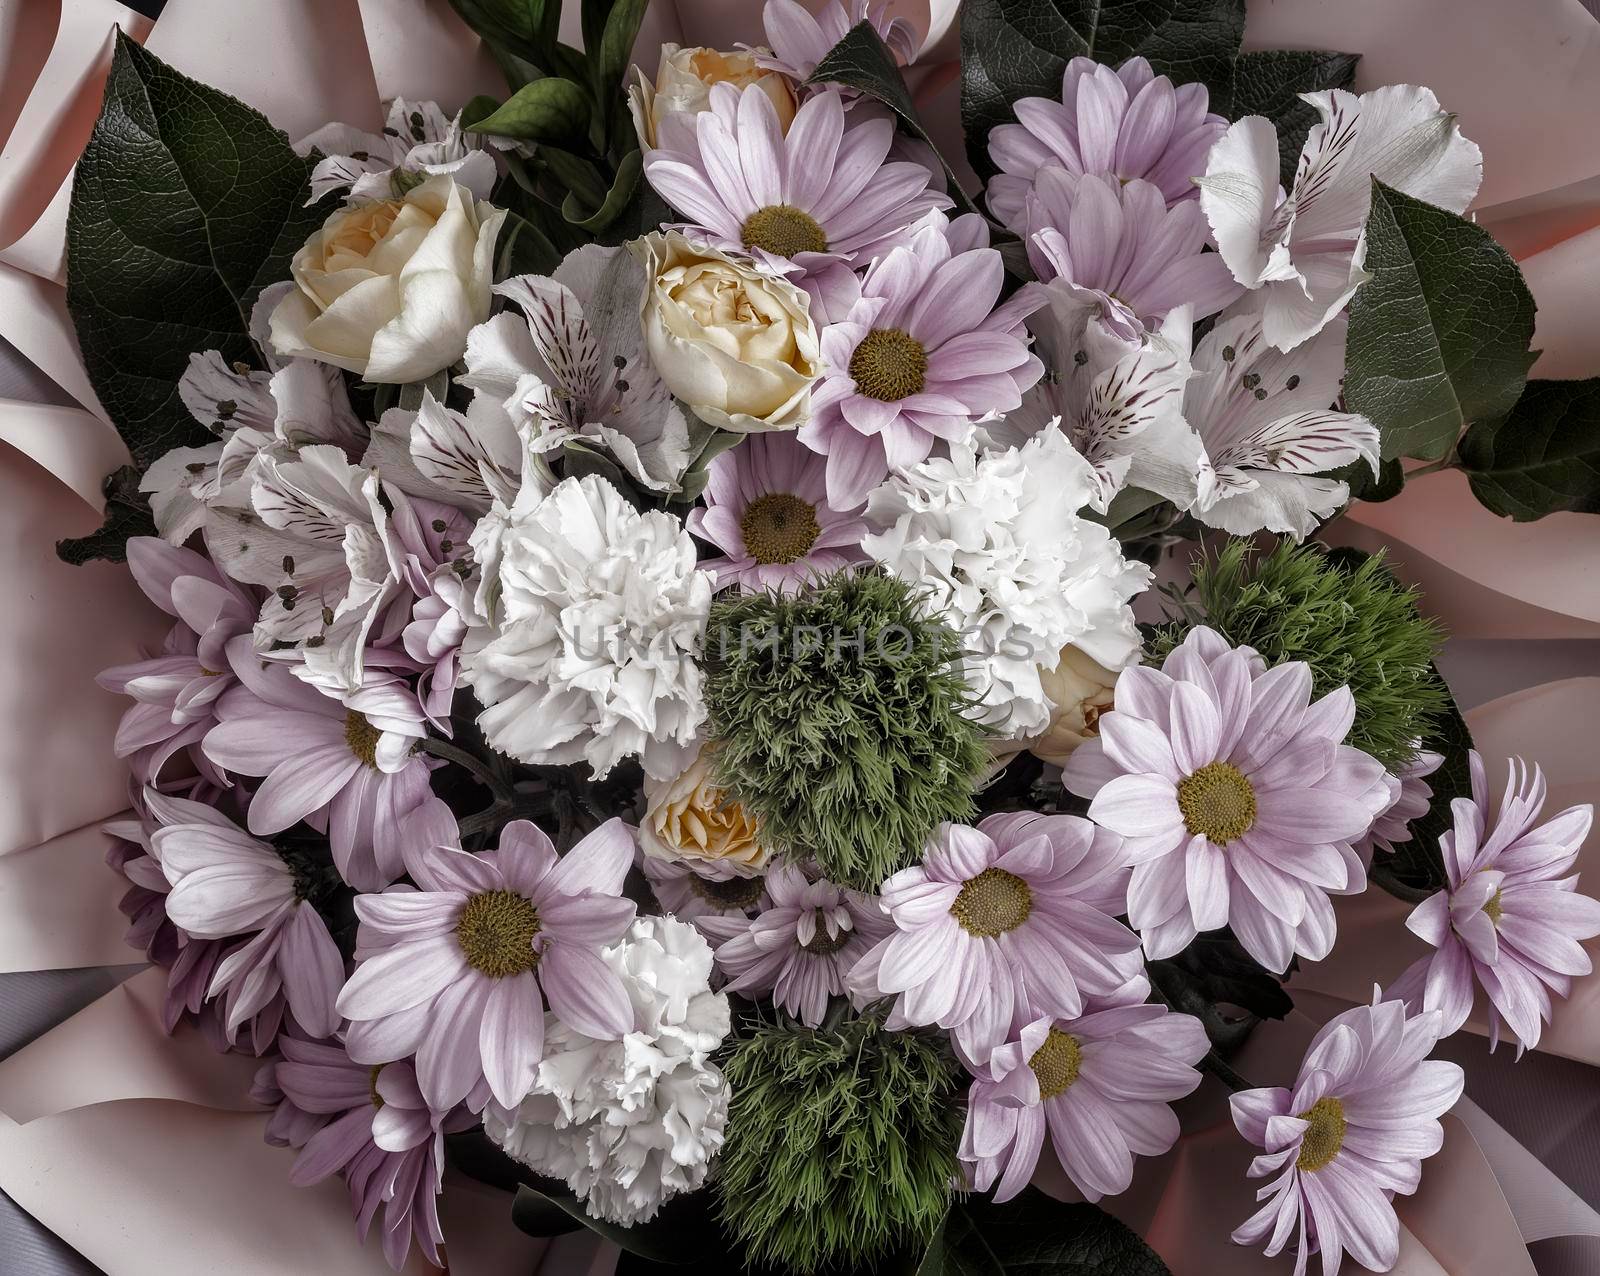 Beautiful chrysanthemums, carnations, roses and other flowers in a bouquet close-up. Top view.